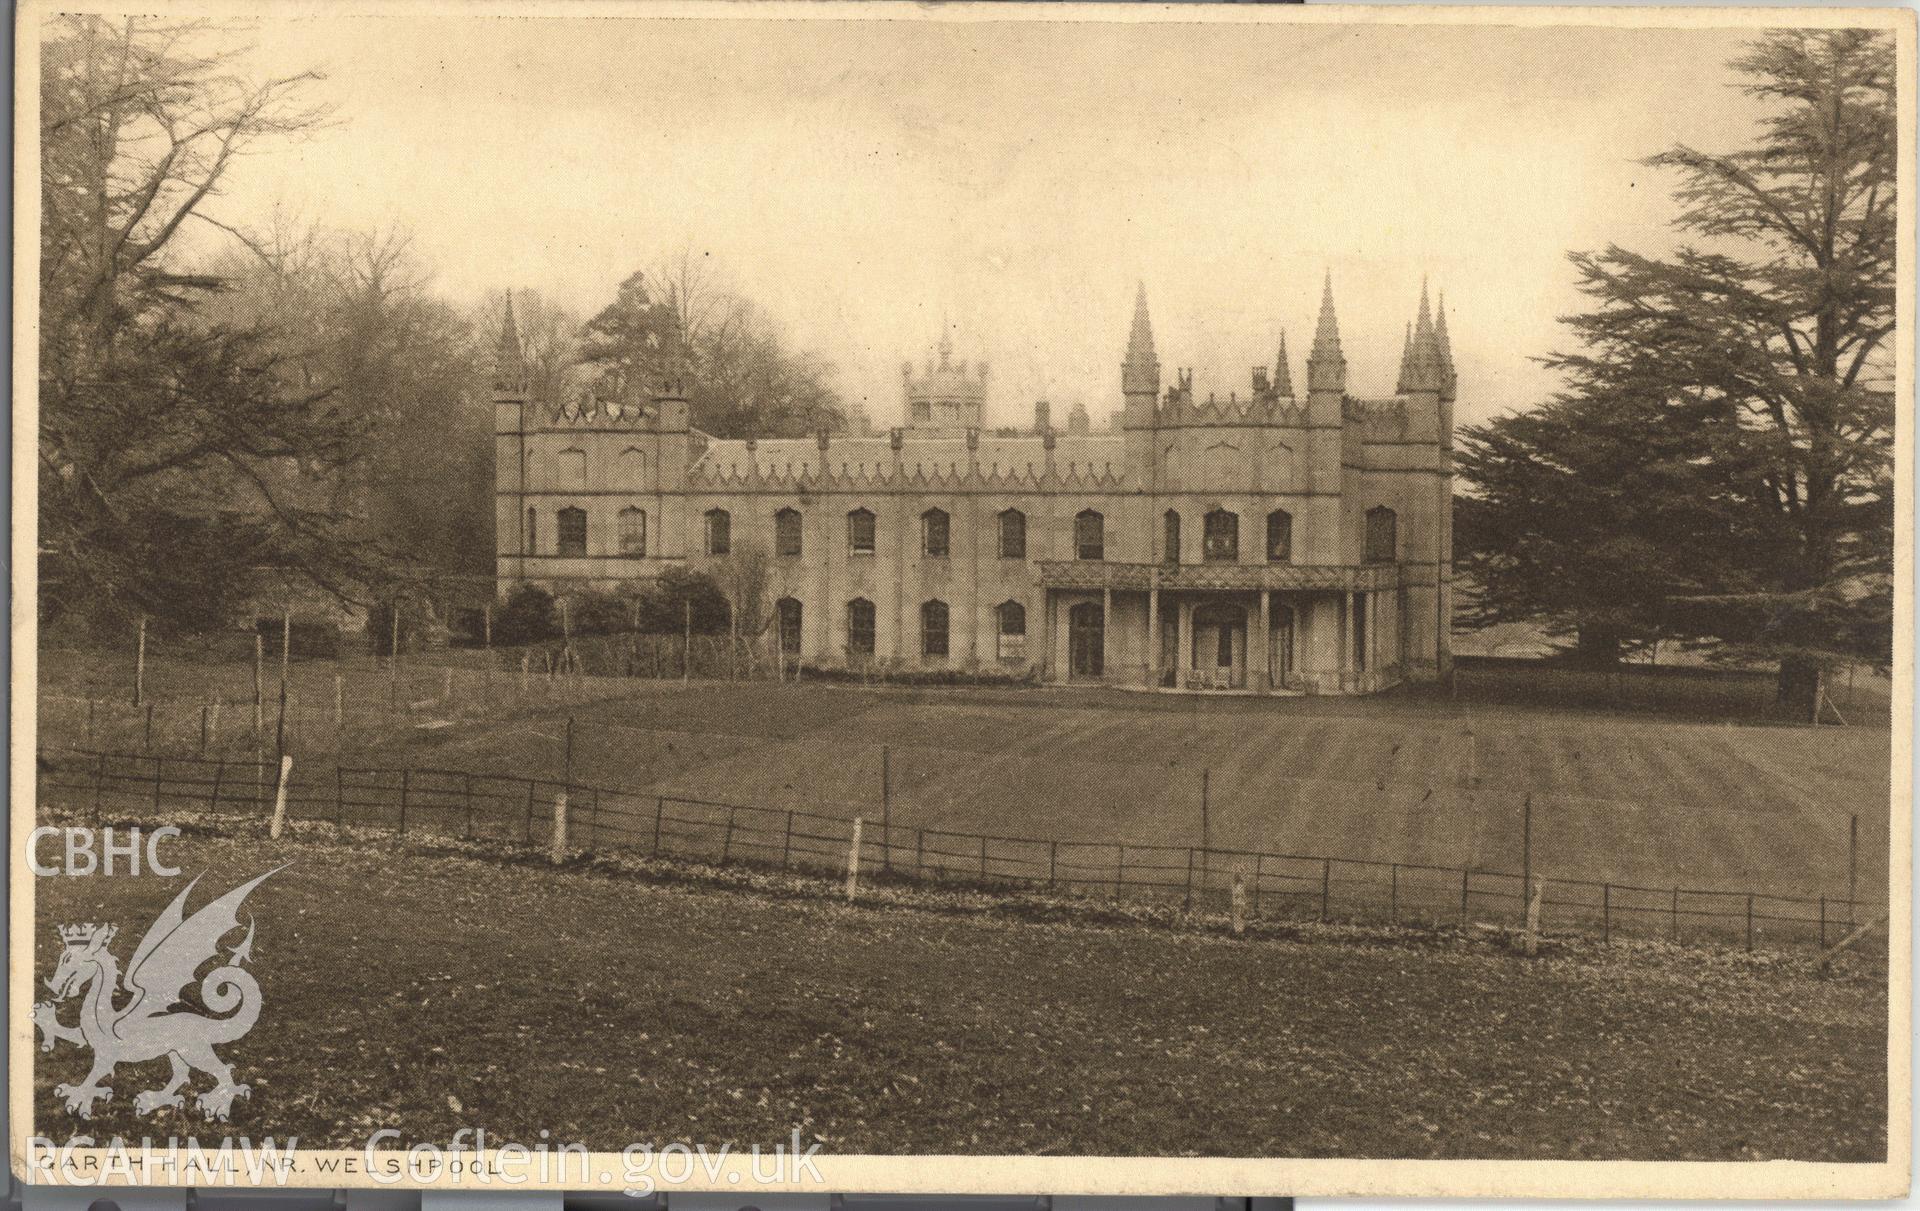 Digitised postcard image of Garth Hall, Guilsfield, the County Times Library, Welshpool. Produced by Parks and Gardens Data Services, from an original item in the Peter Davis Collection at Parks and Gardens UK. We hold only web-resolution images of this collection, suitable for viewing on screen and for research purposes only. We do not hold the original images, or publication quality scans.